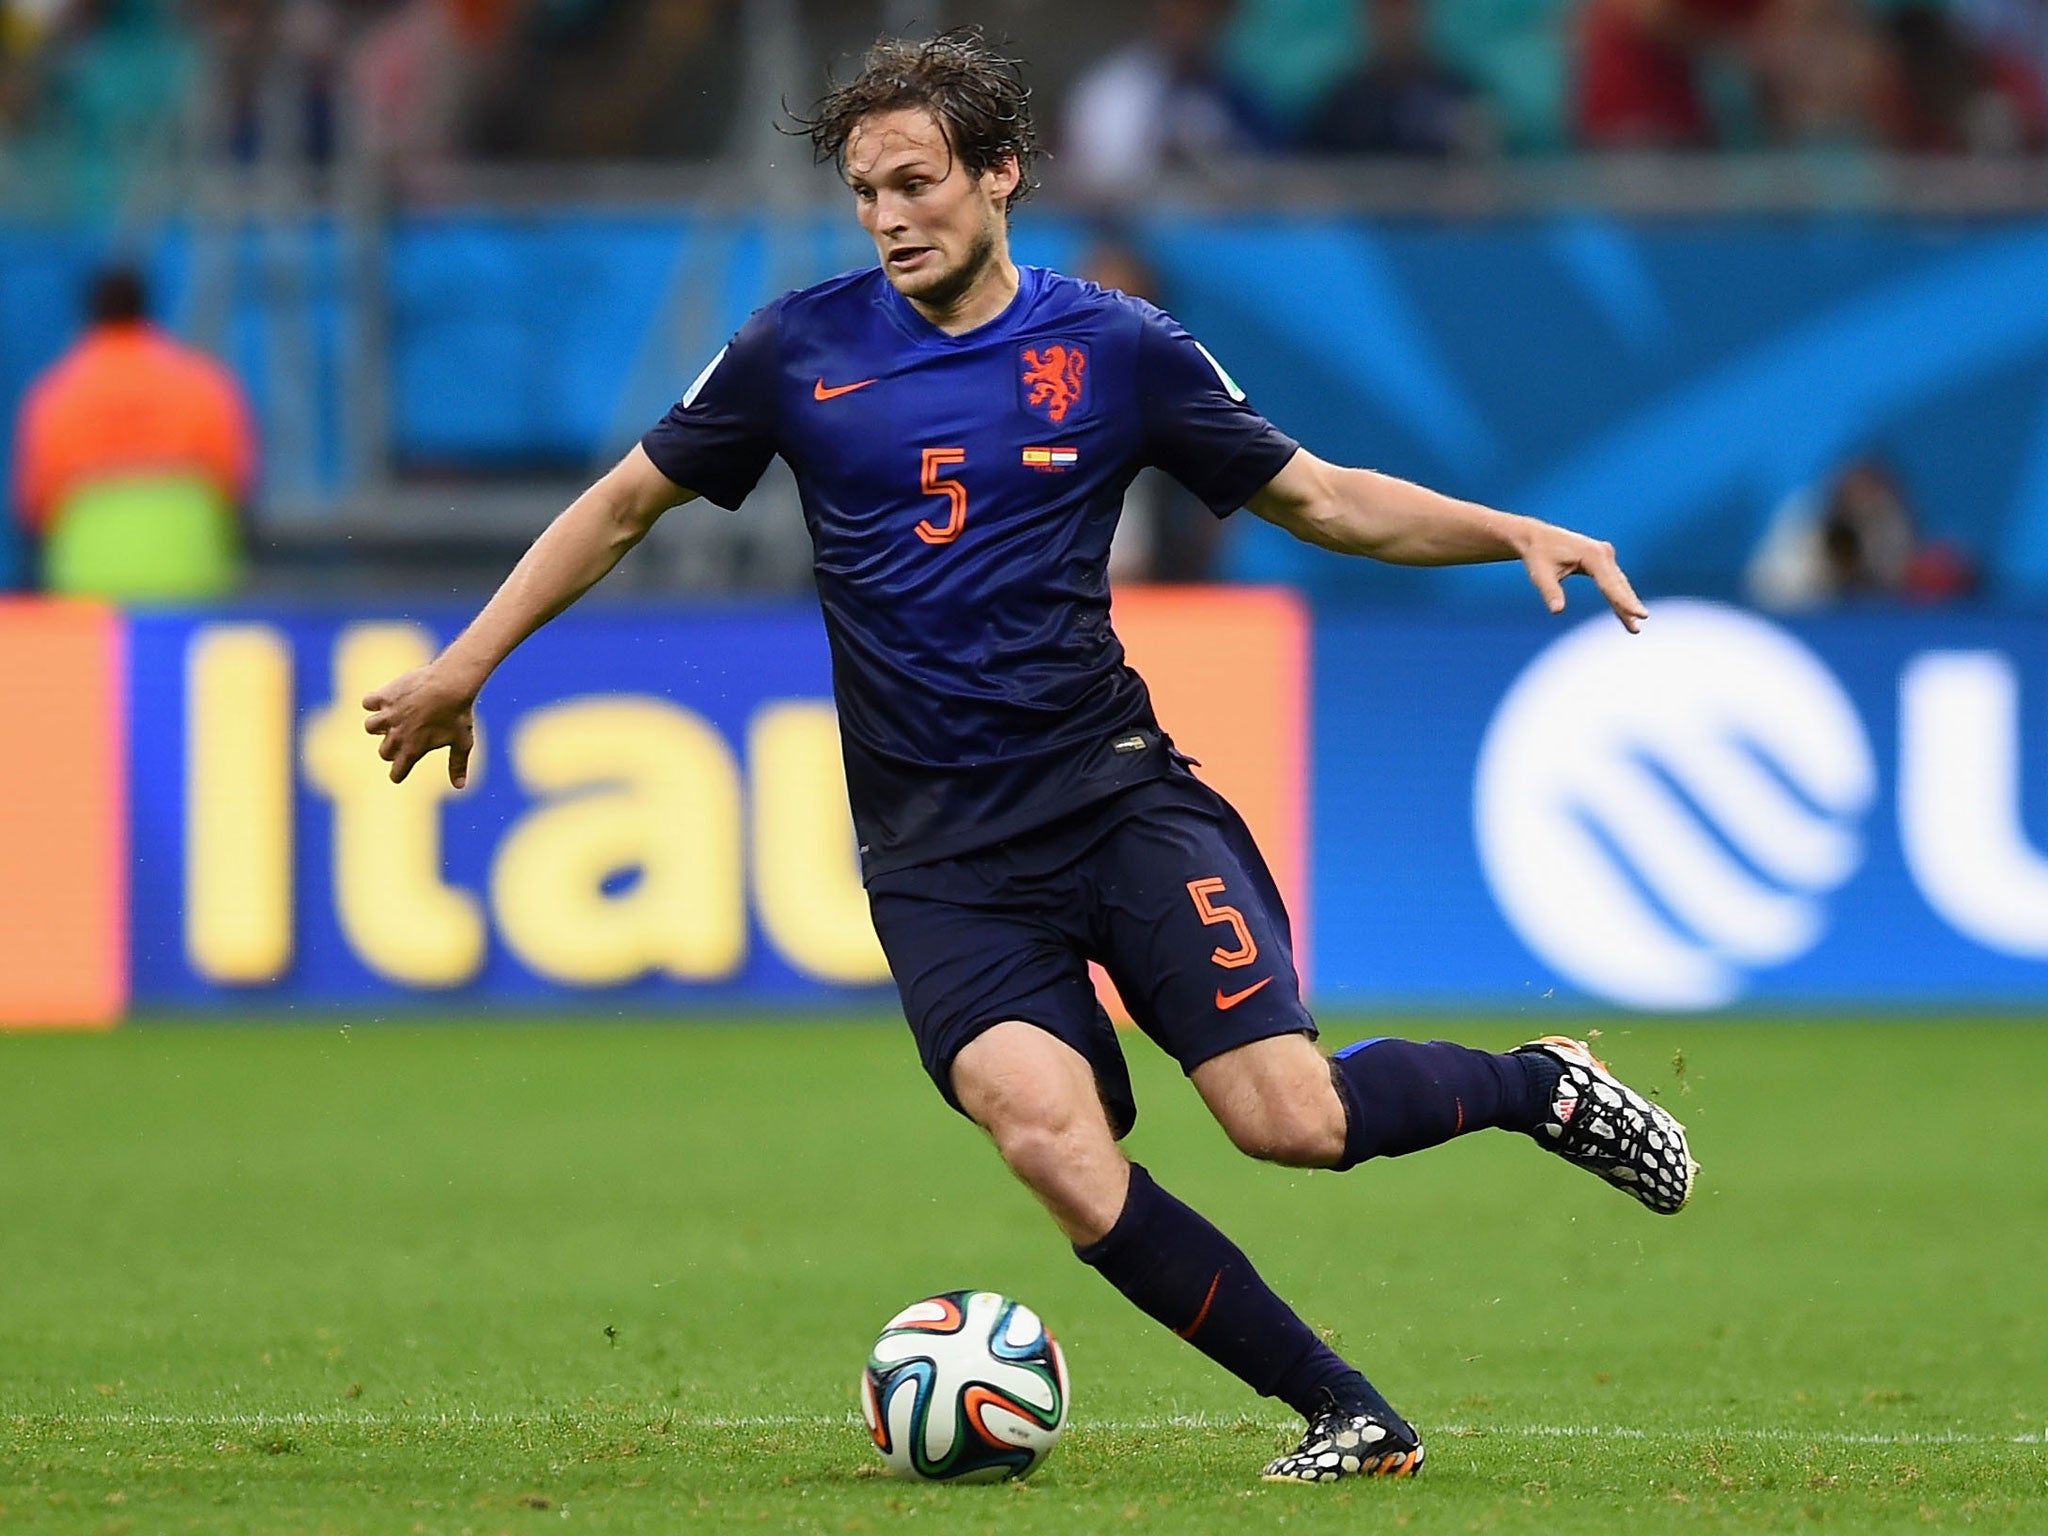 Daley Blind in action at the World Cup